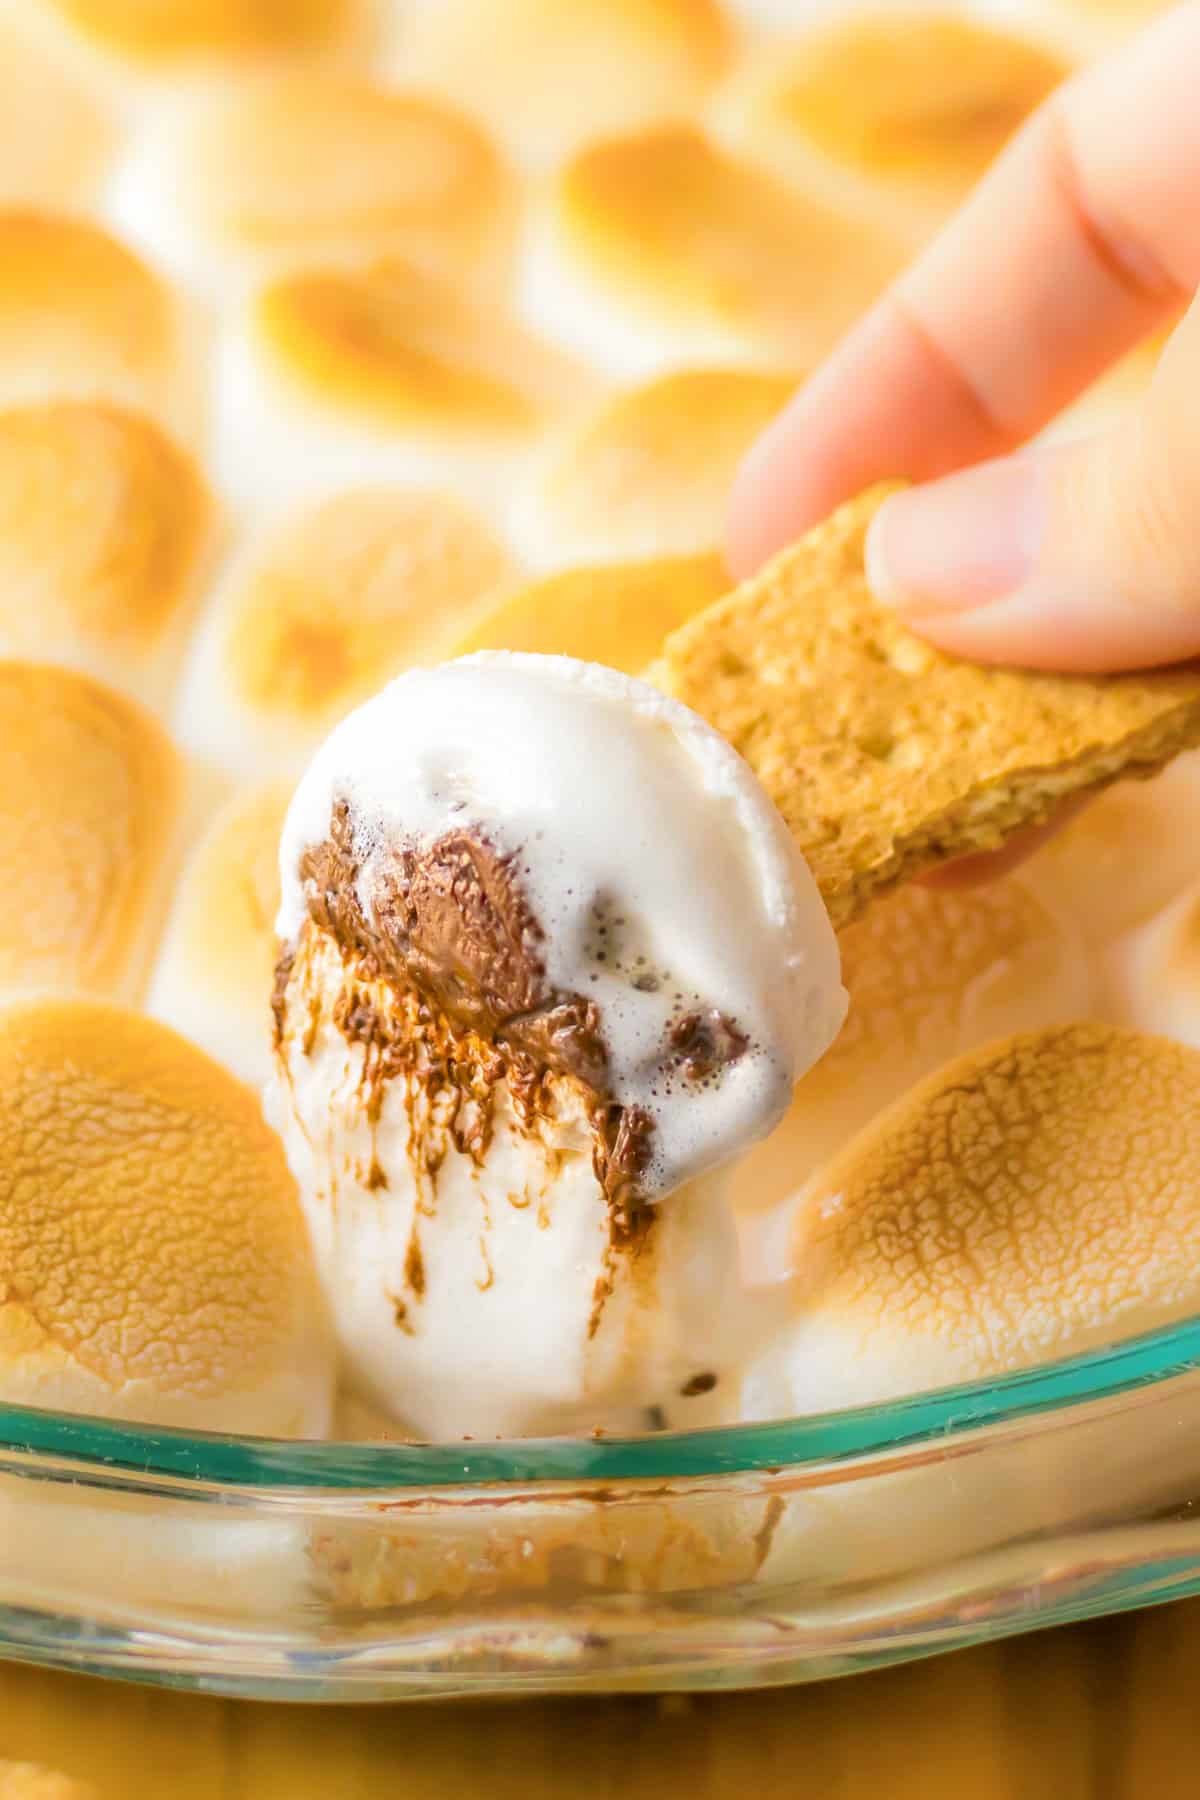 Graham cracker being dipped in s'mores dip made with marshmallows and chocolate chips.